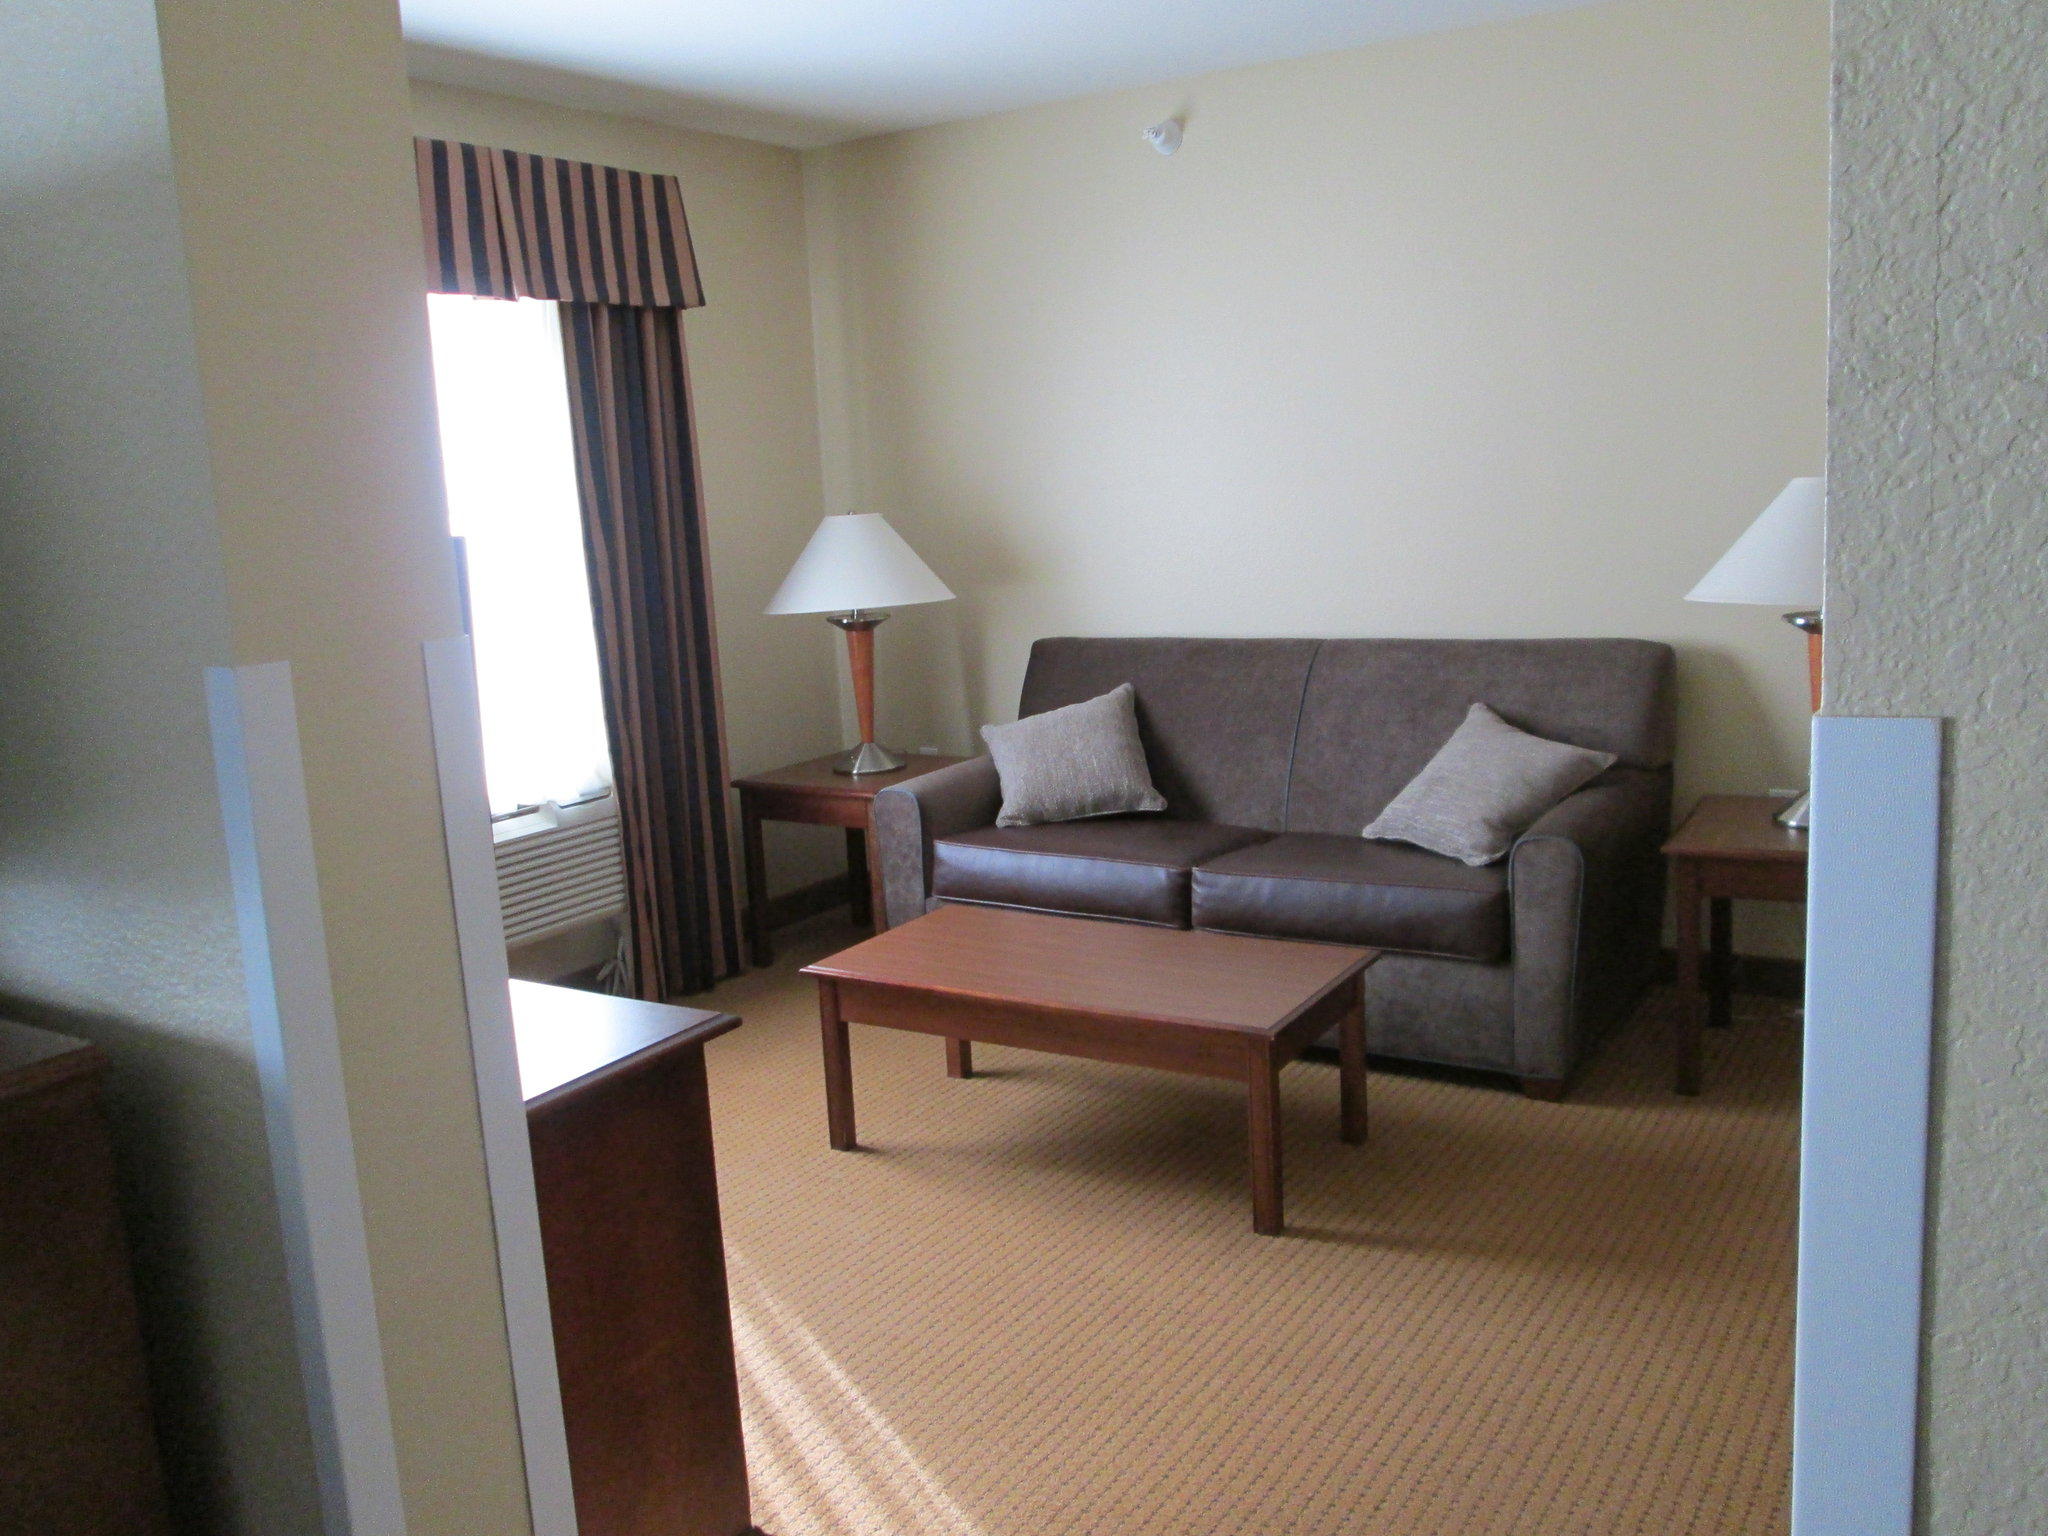 Holiday Inn Express Newell-Chester WV Photo